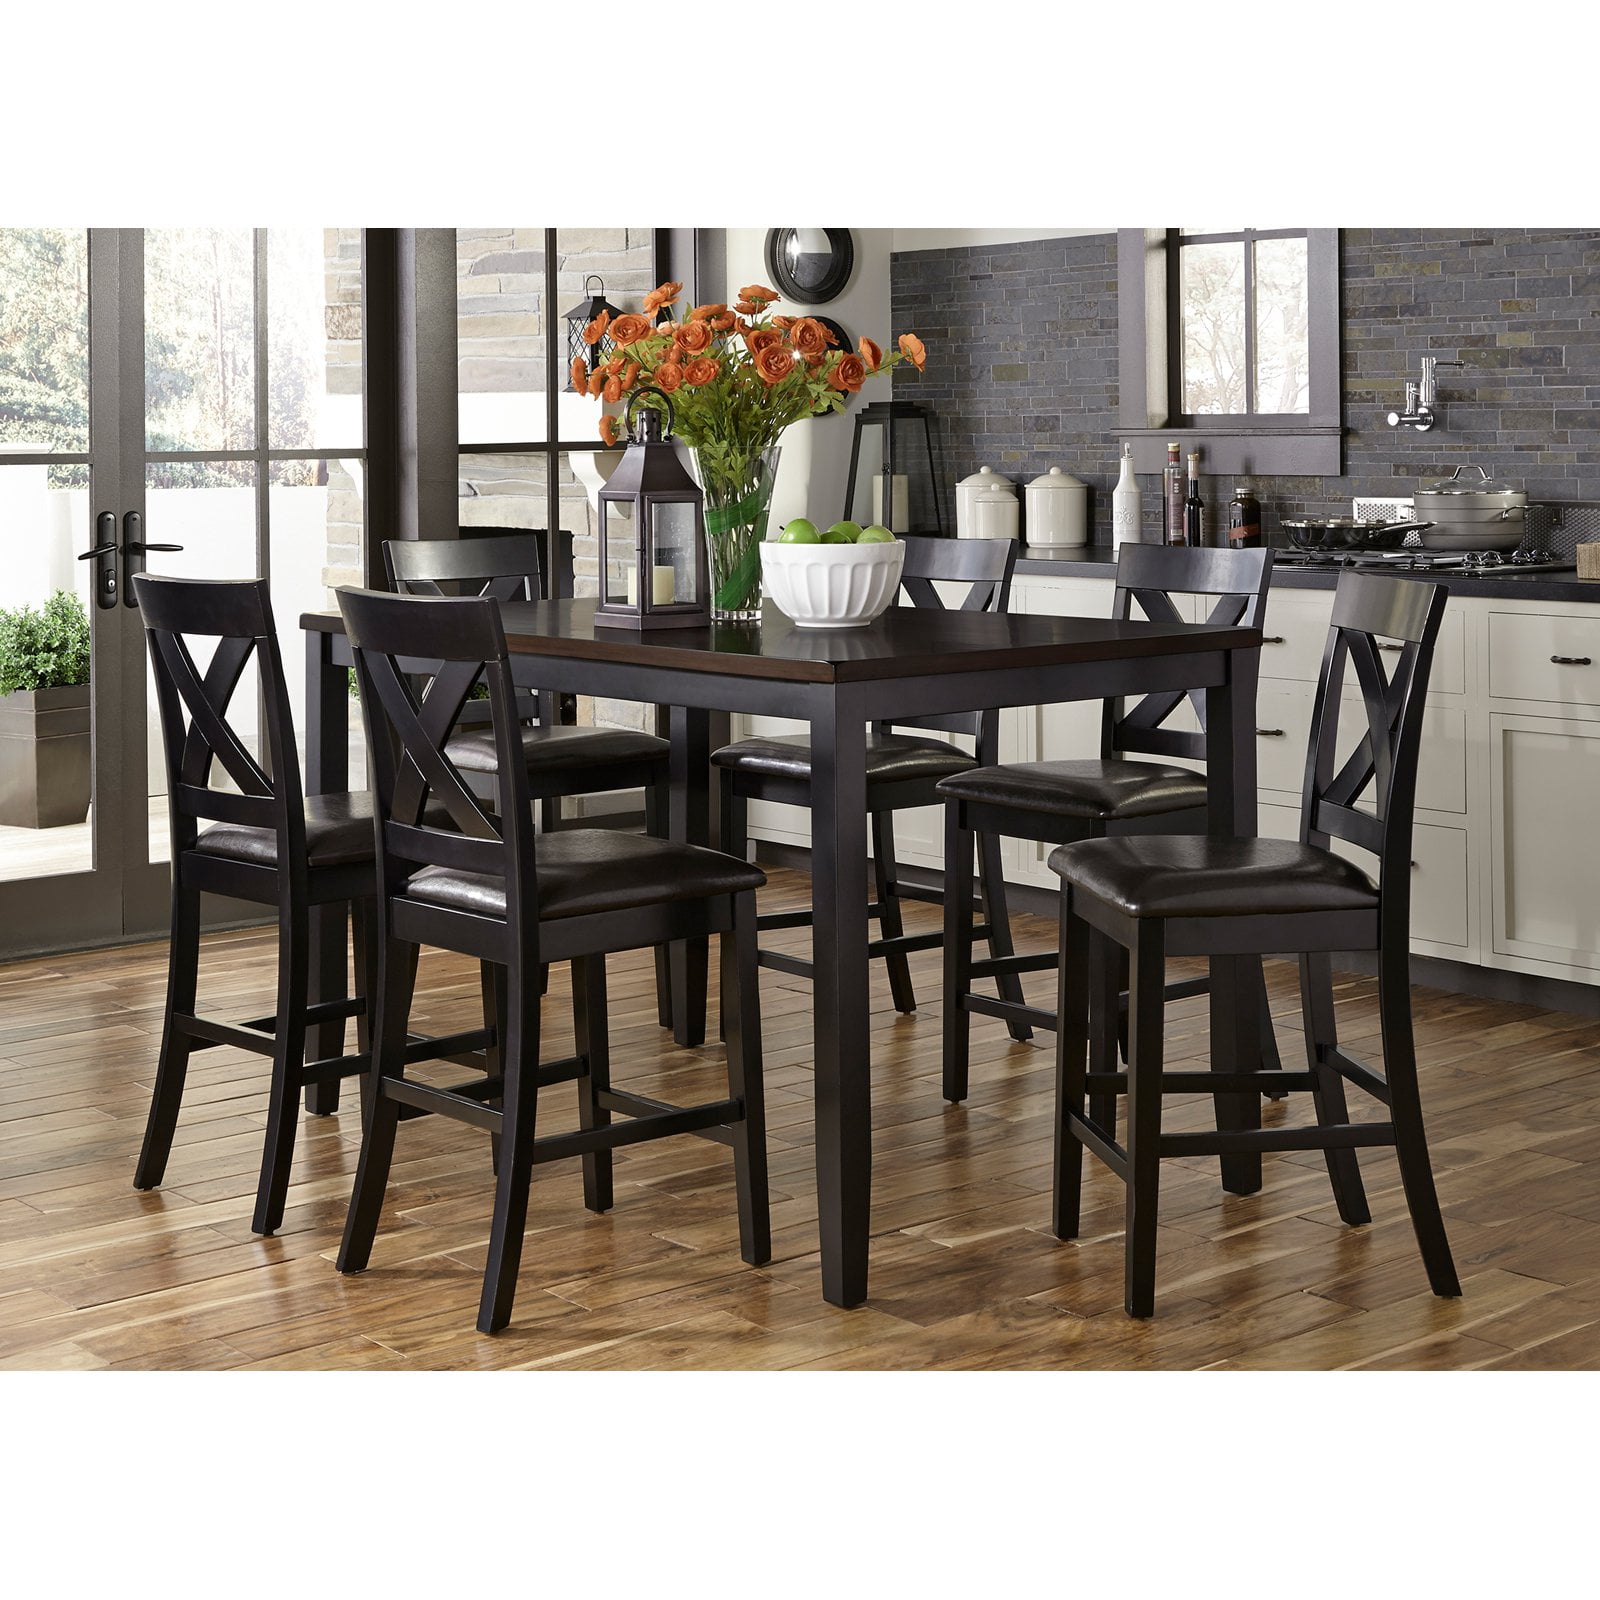 Liberty Furniture Industries Thornton II 7 Piece Counter Height Dining ...